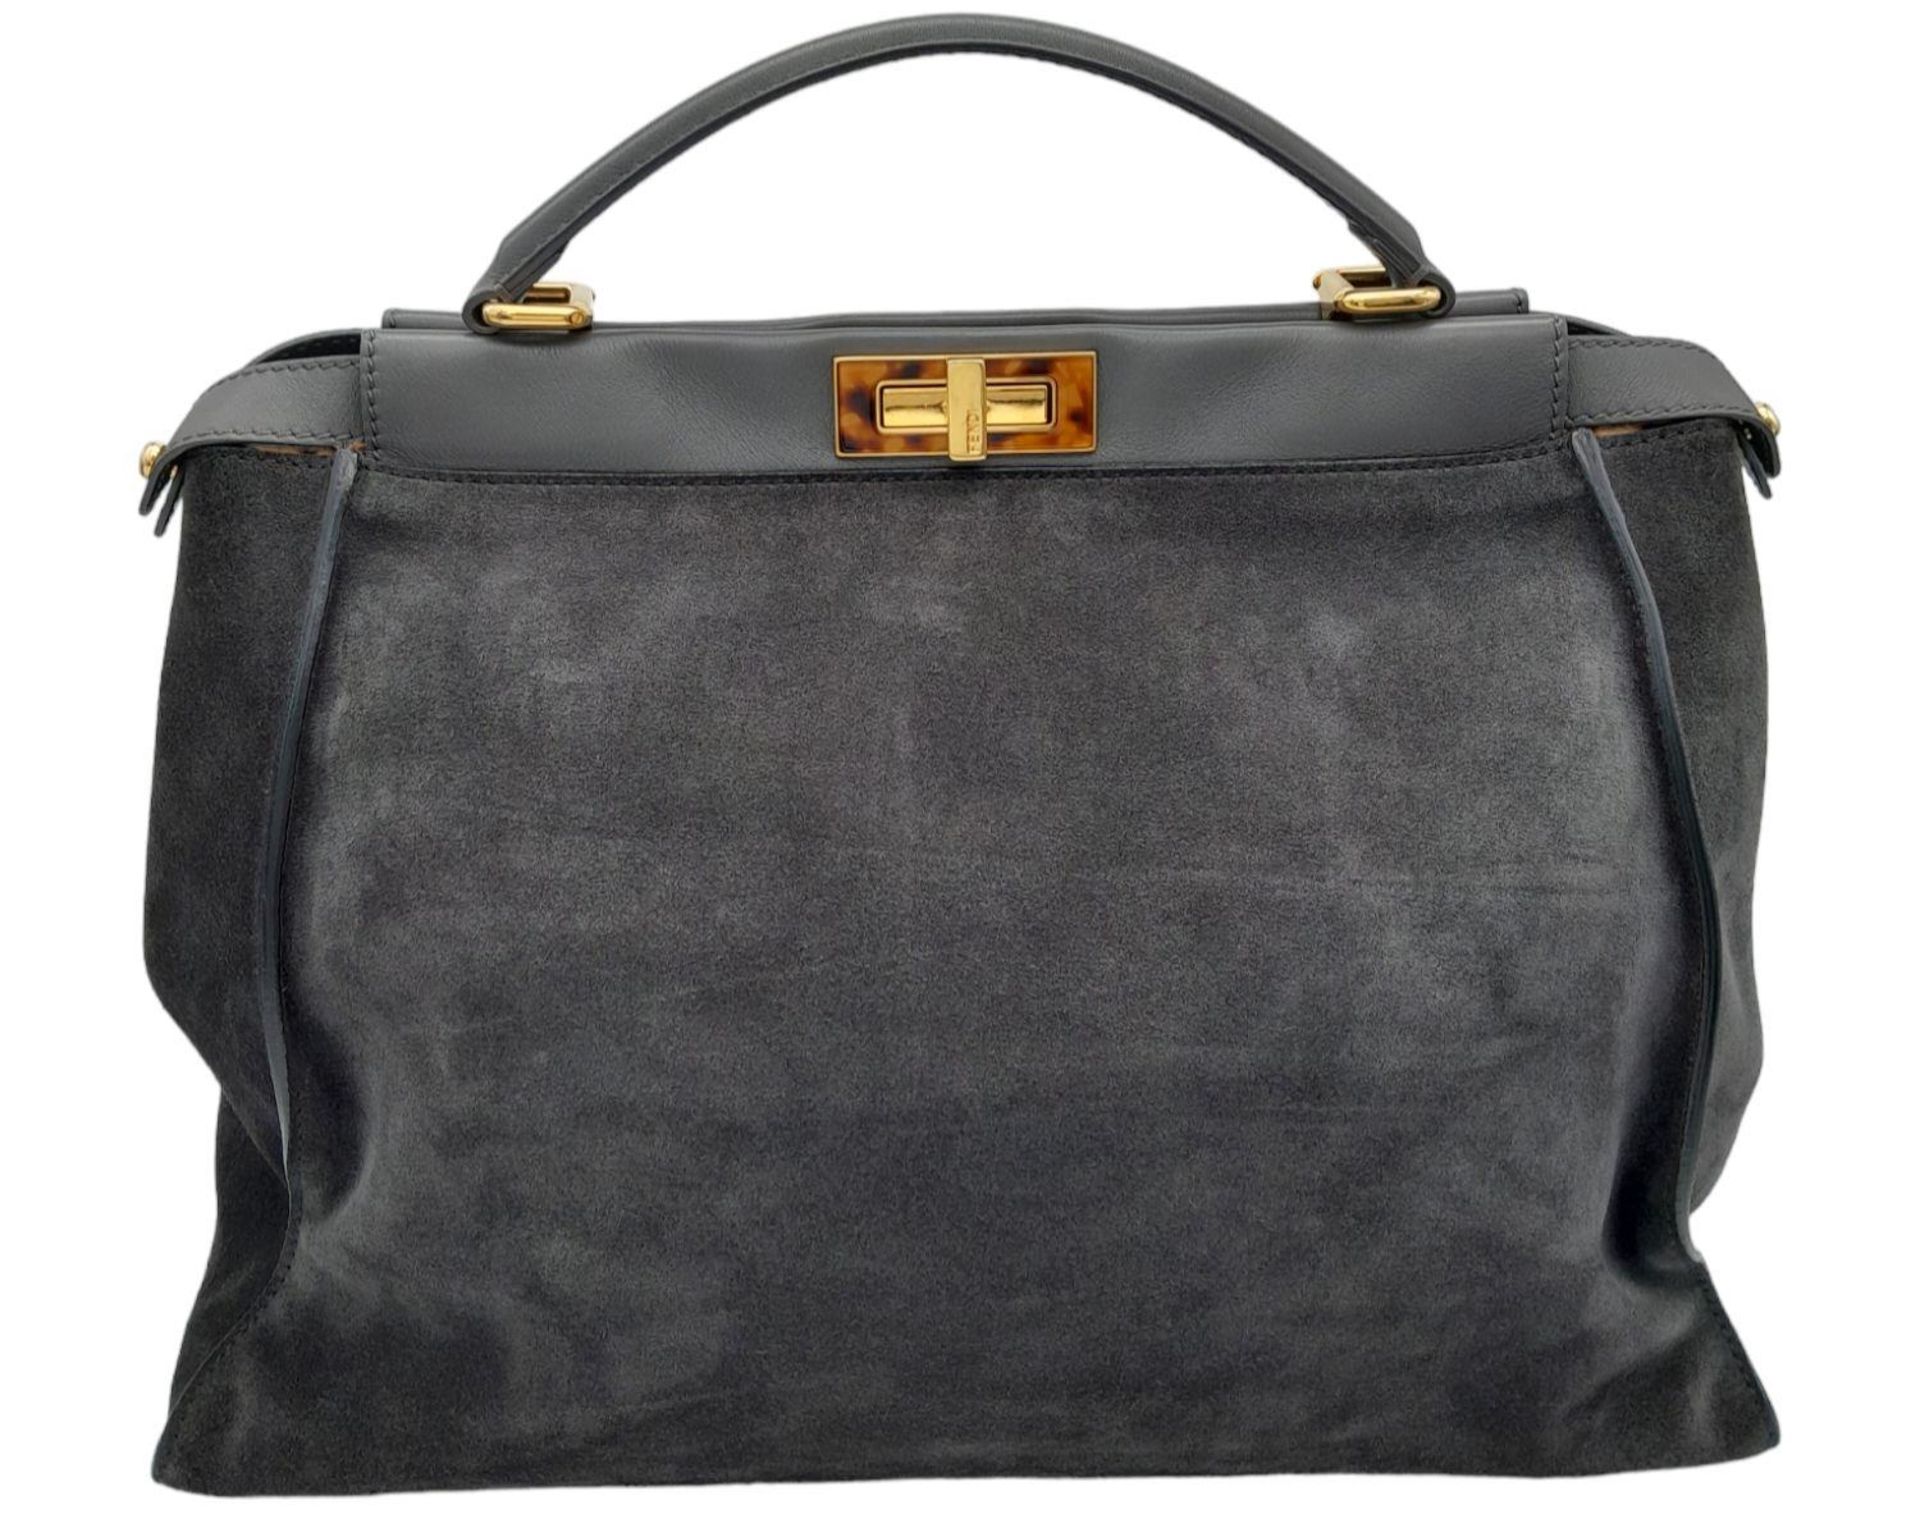 A Fendi Grey Peekaboo Bag. Suede exterior with leather trim, single leather handle, gold-toned